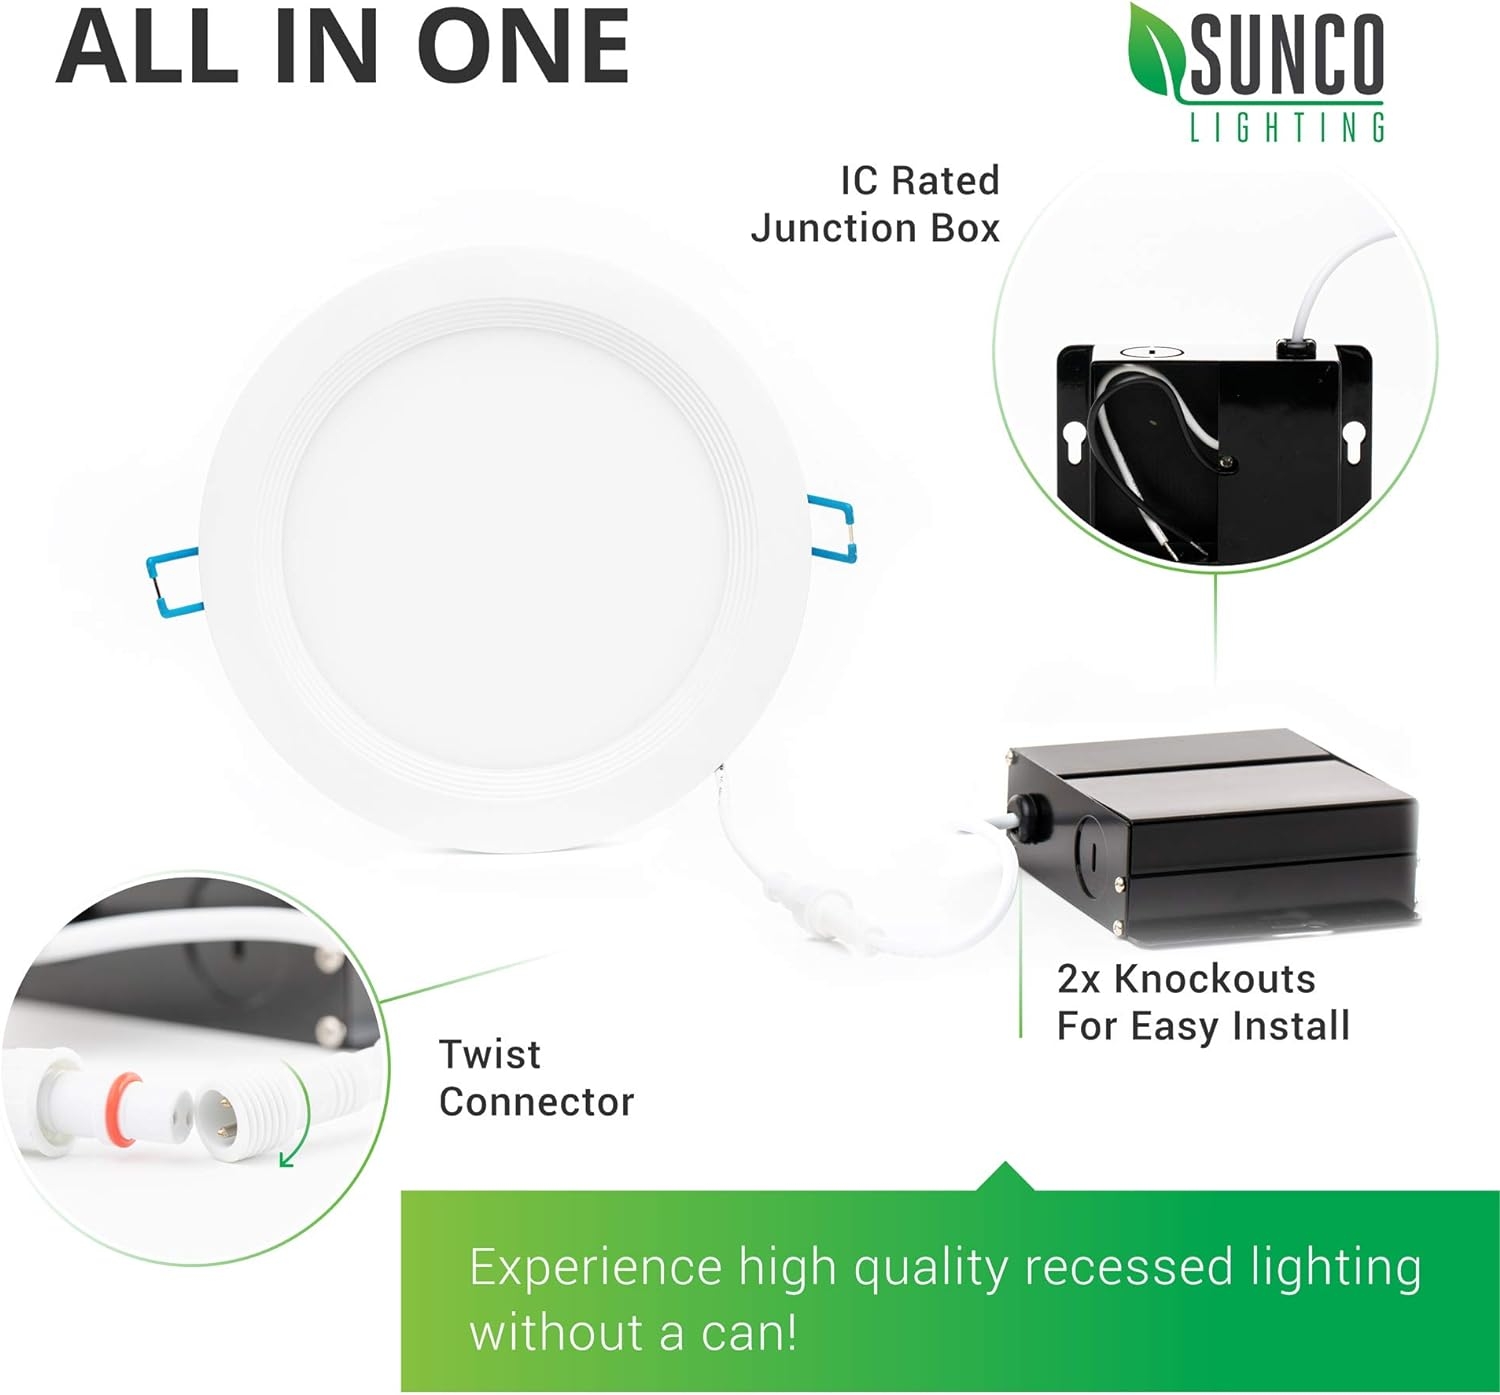 Sunco Lighting 4 Pack 6 Inch Slim LED Downlight, Baffle Trim, Junction Box, 14W=100W, 850 LM, Dimmable, 2700K Soft White, Recessed Jbox Fixture, IC Rated, Retrofit Installation - ETL & Energy Star